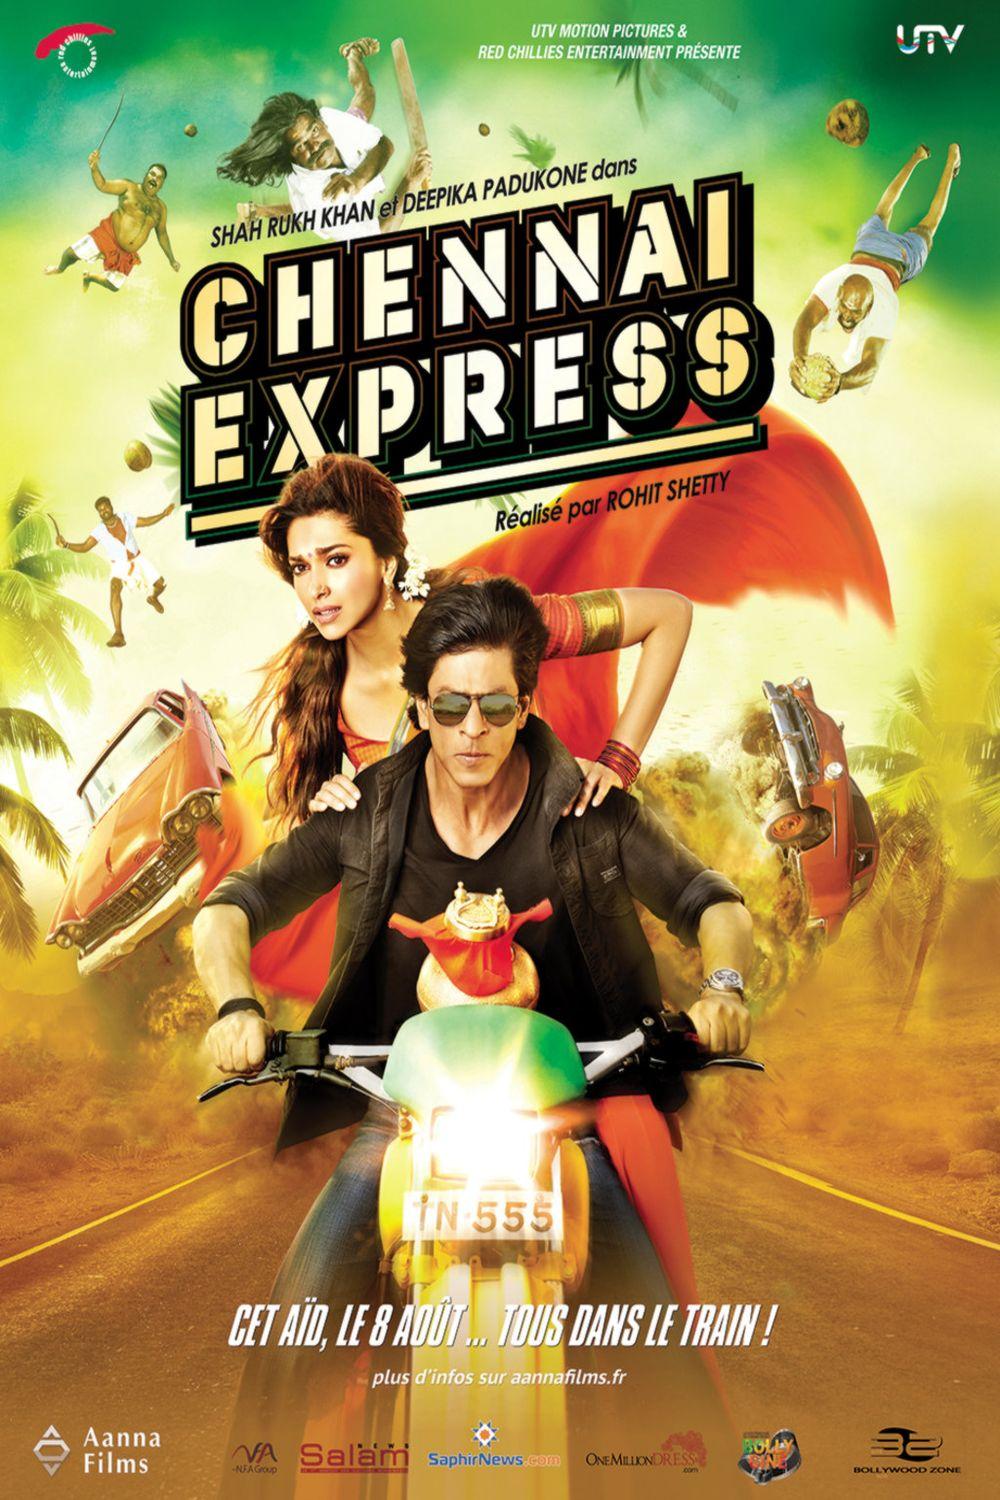 Chennai Express: A romantic comedy packed with action and humor, as a man finds himself on an adventurous train journey to fulfill his grandmother's last wish.